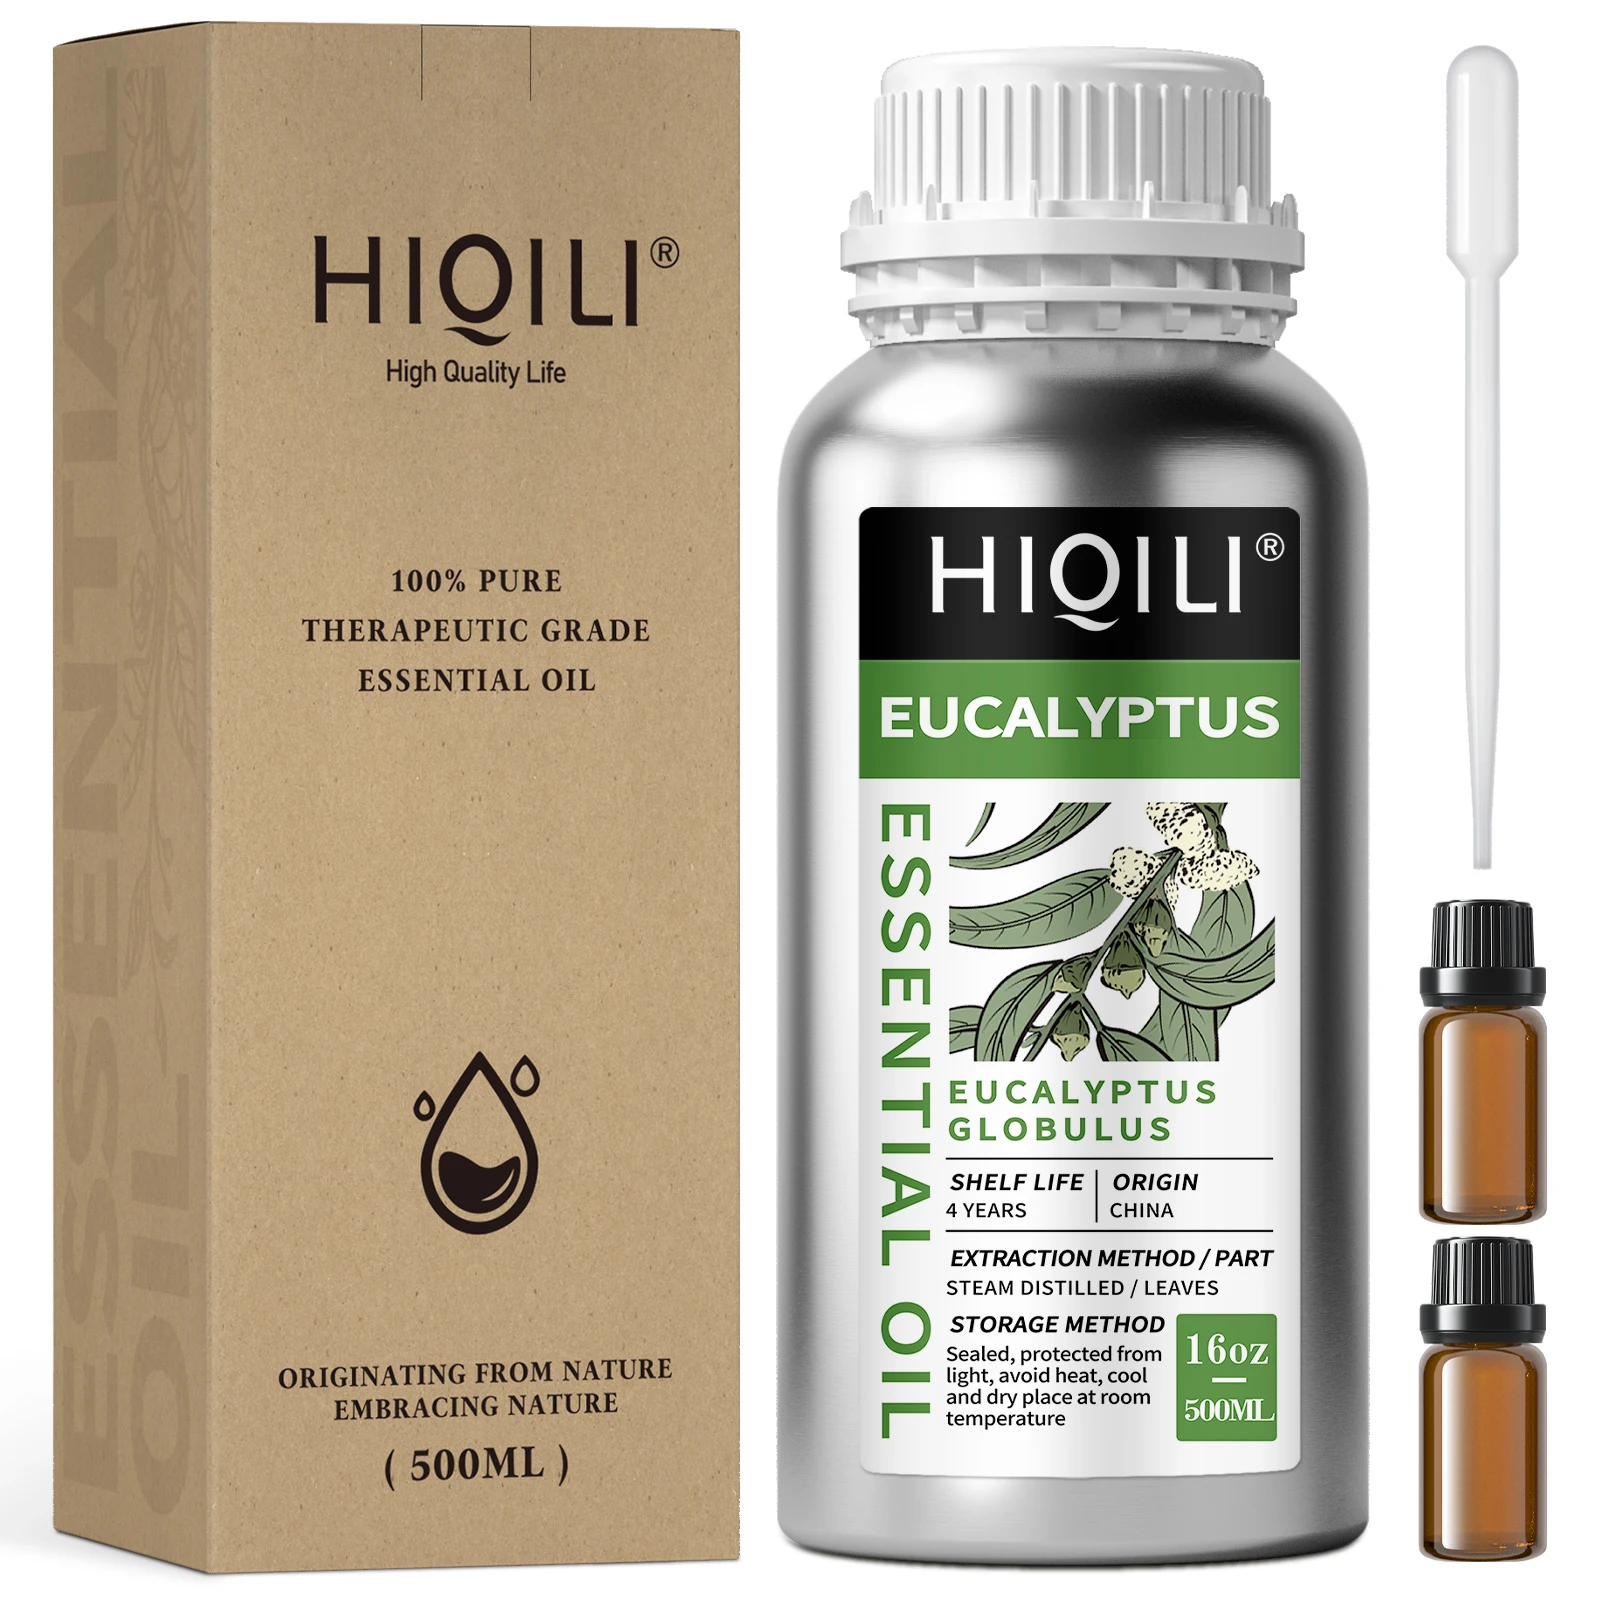 HIQILI 500ML Eucalyptus Essential Oils, 100% Pure Nature for Aromatherapy Used for Diffuser, Humidifier, Massage | Prevent Colds hiqili 500ml sweet orange essential oils 100% pure nature for aromatherapy used for diffuser，humidifier，massage fresh air